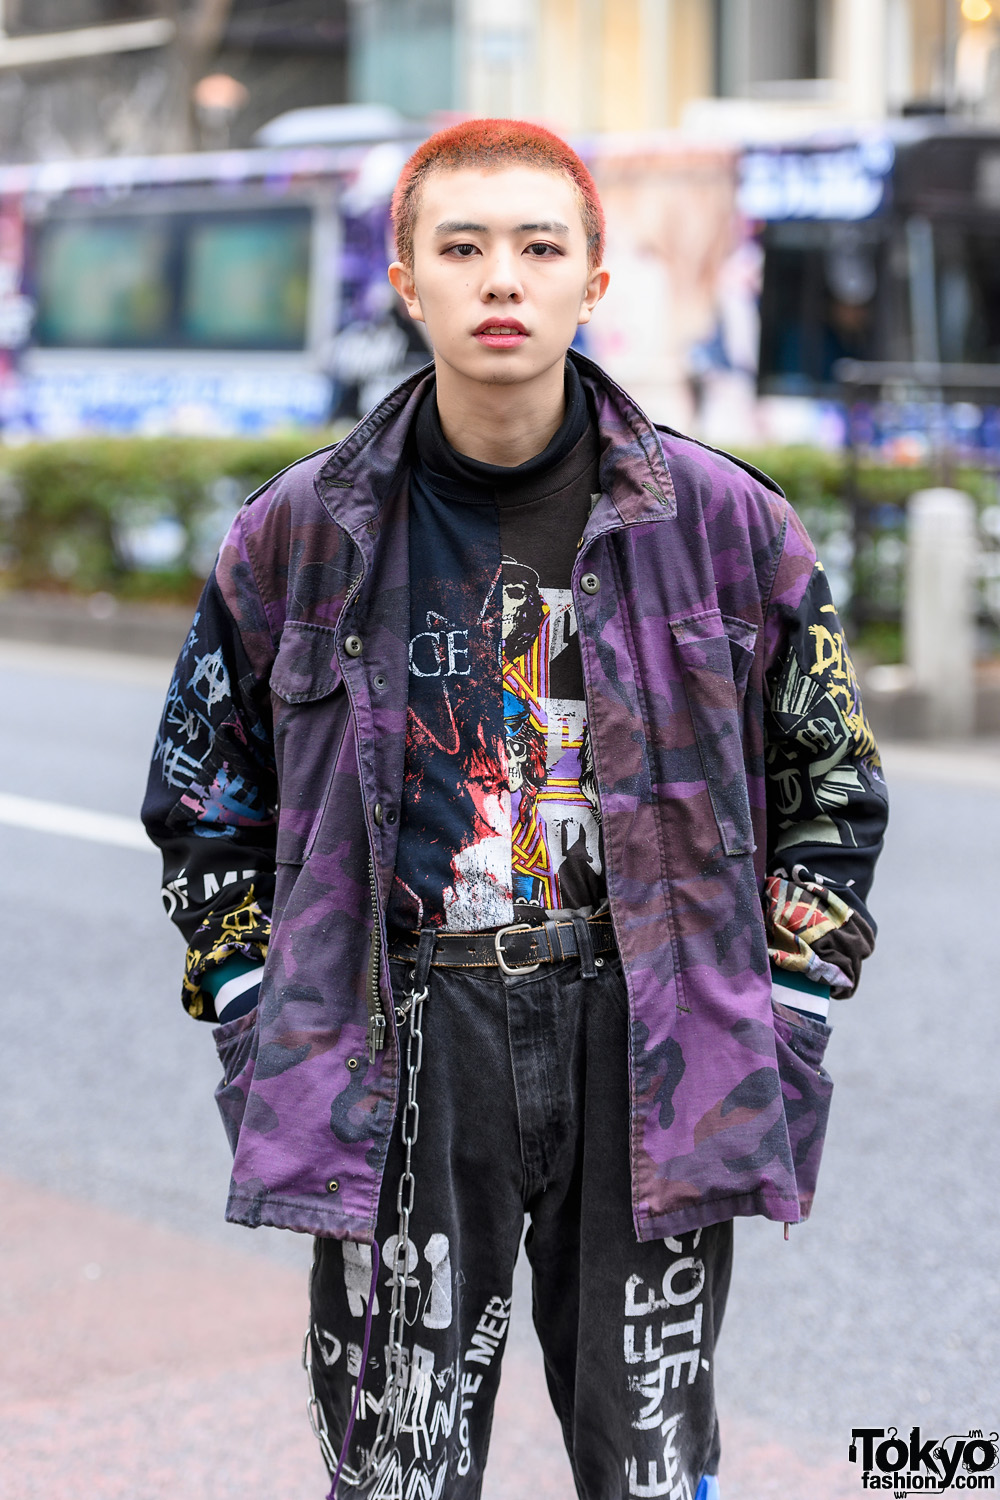 Japanese Model’s Cote Mer Graphic Street Style w/ Pink Shaved Hair ...